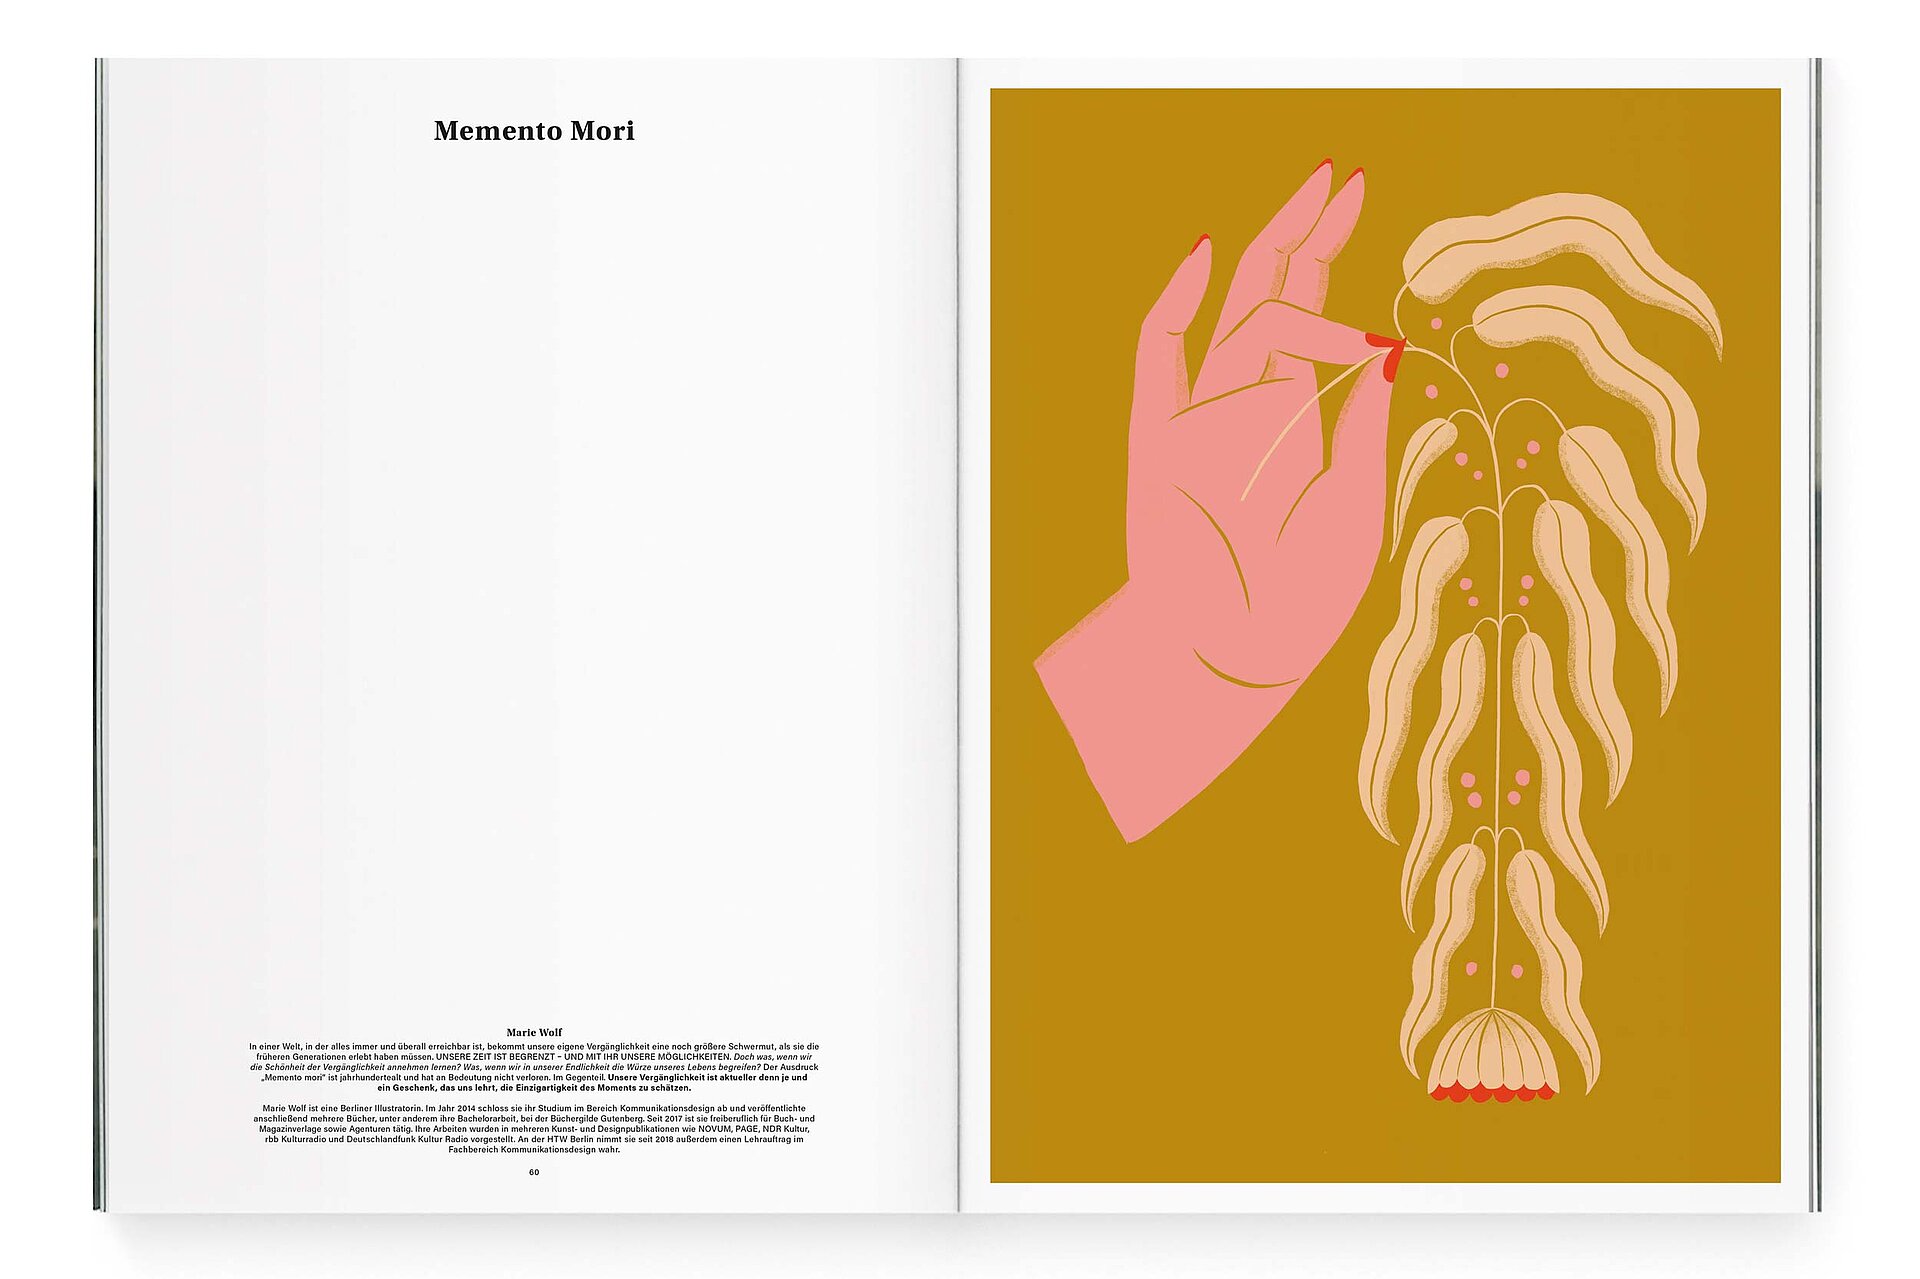 mjr magazine pages with illustration hand and plant design bern